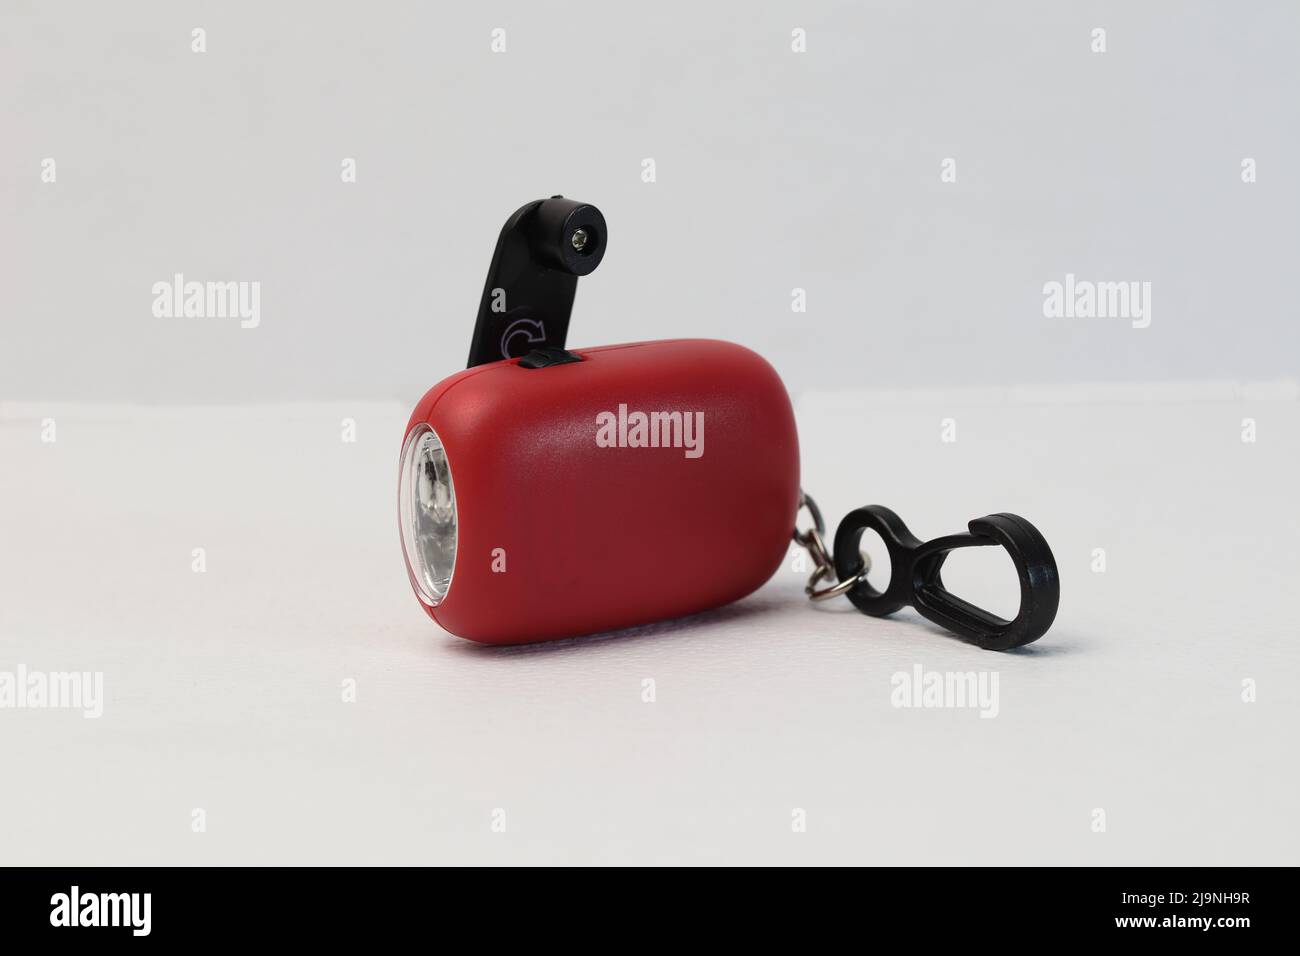 Dynamo flashlight. Compact, ideal for backpacks, gear bag for glove compartments. Just wind handle to charge, no battery to replace. Stock Photo